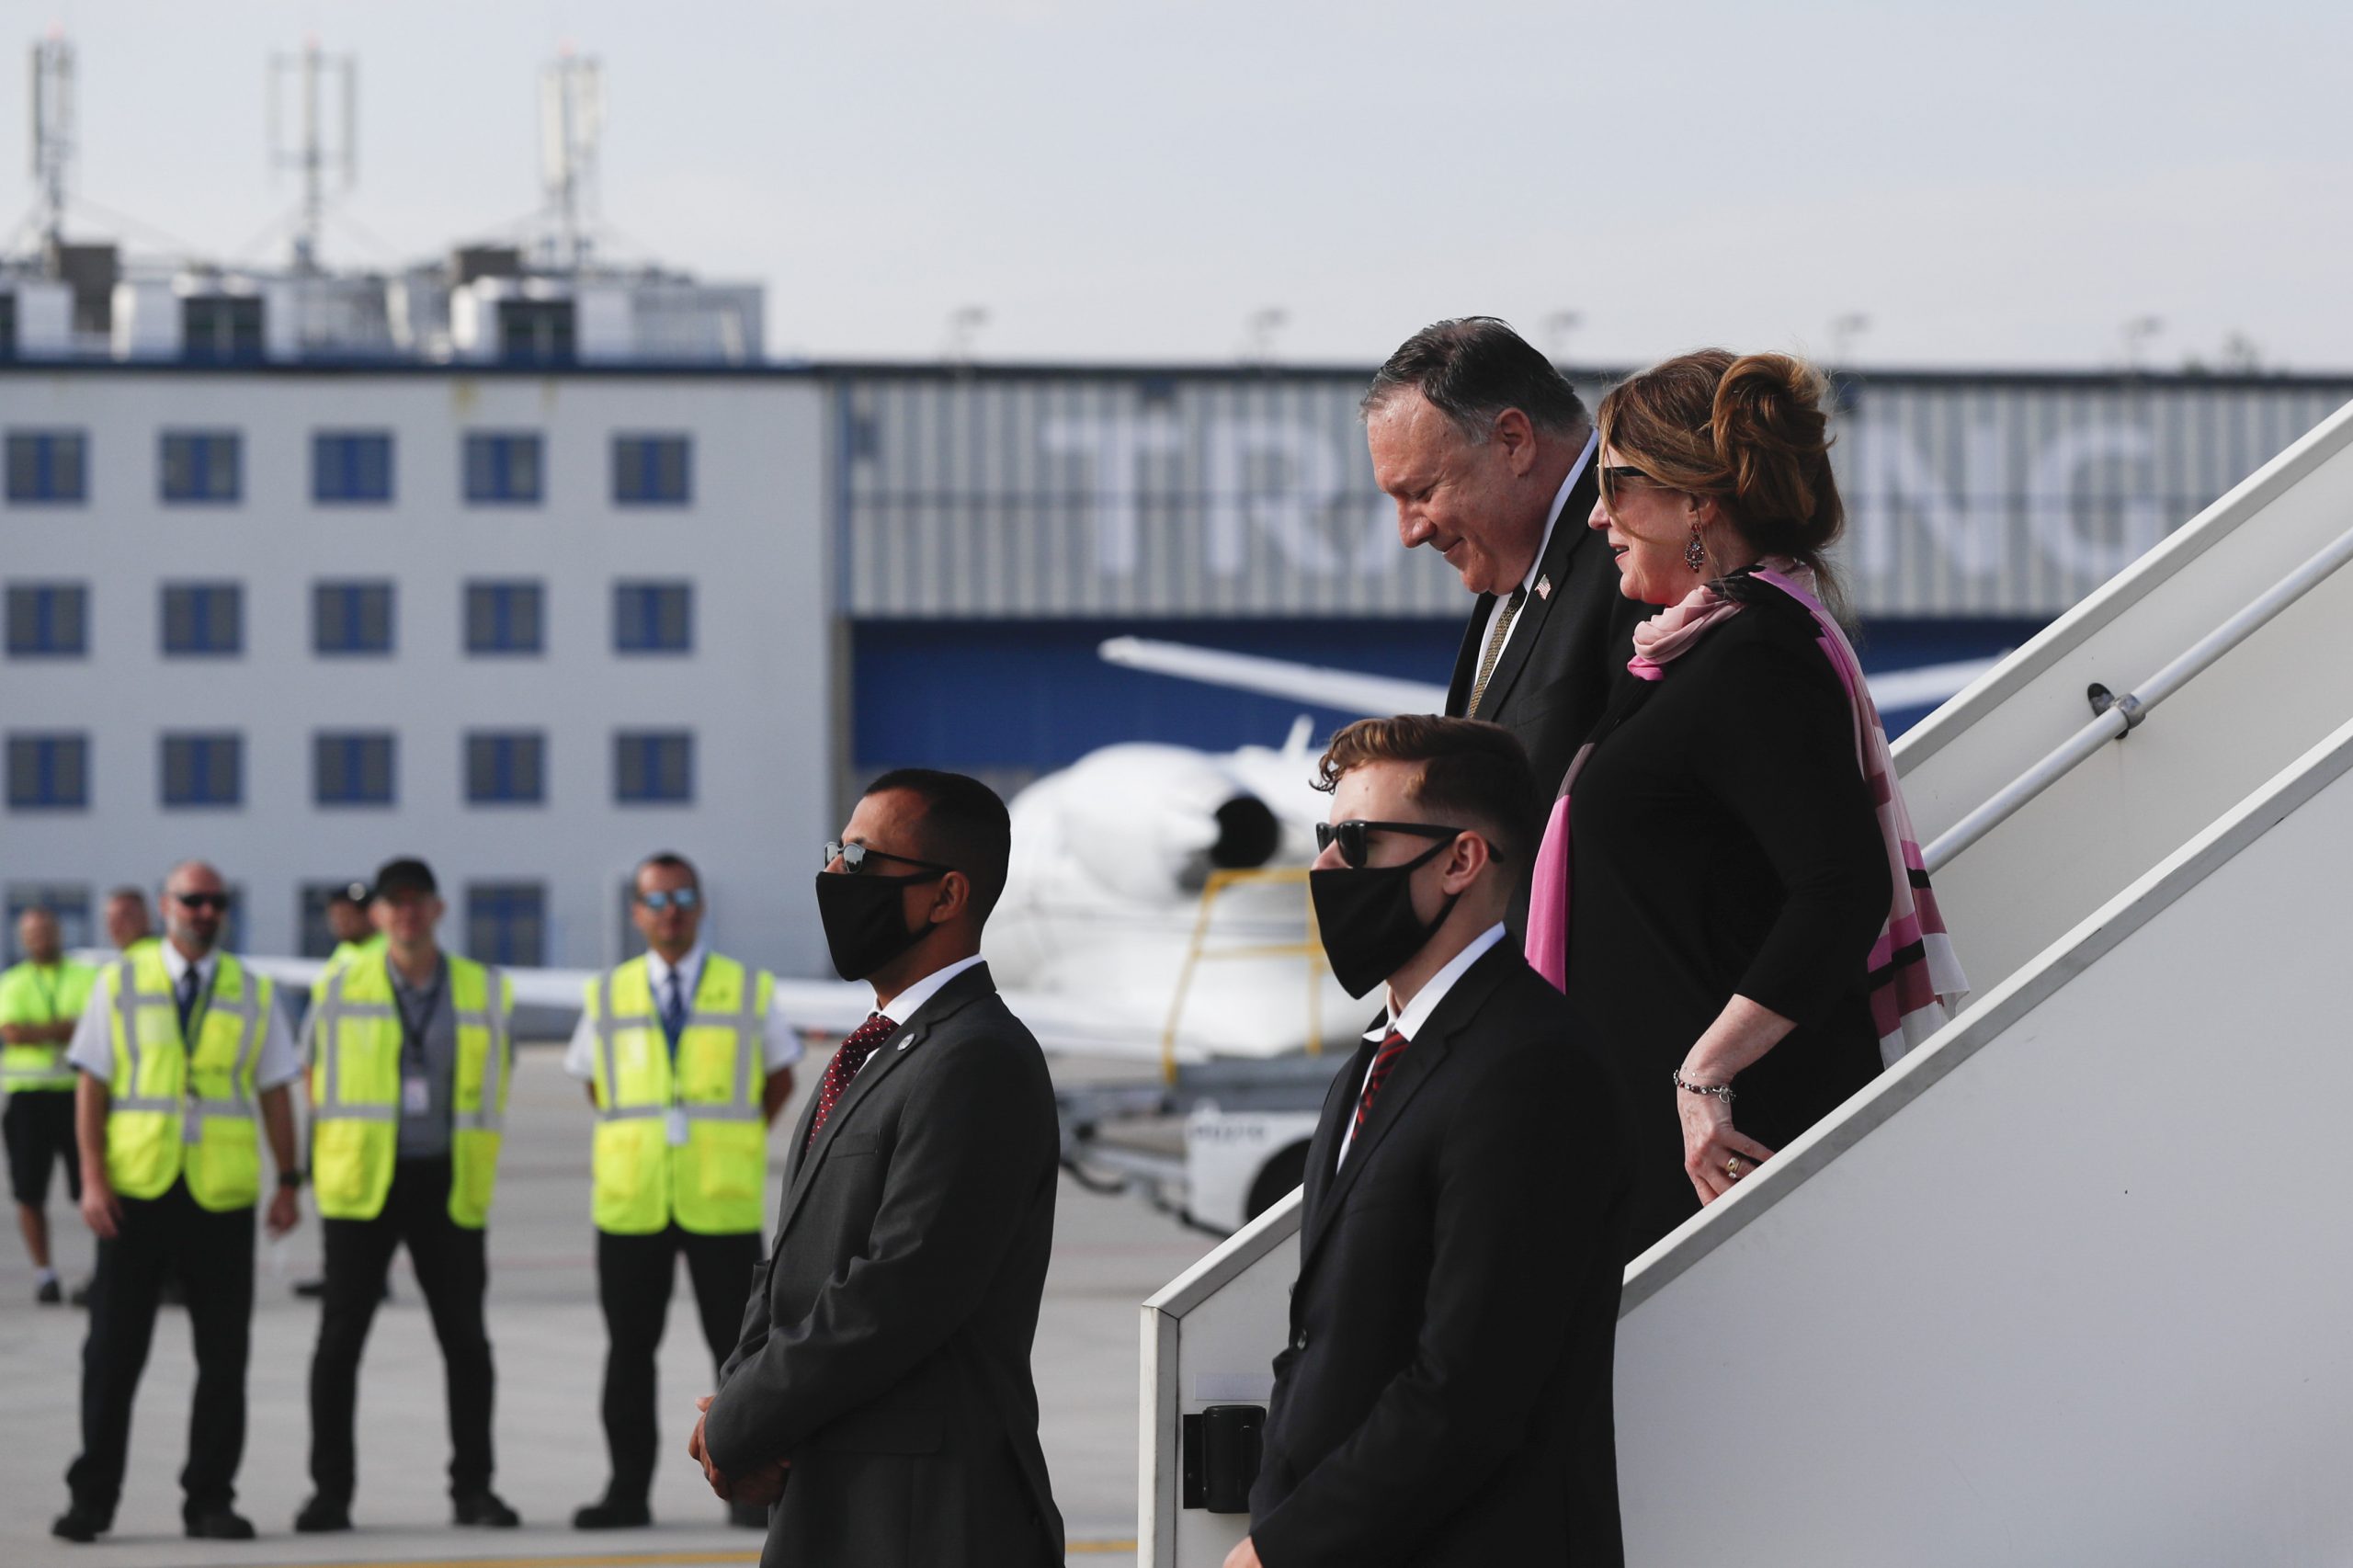 Pompeo’s CEE Tour: Hungary Not Among Destinations